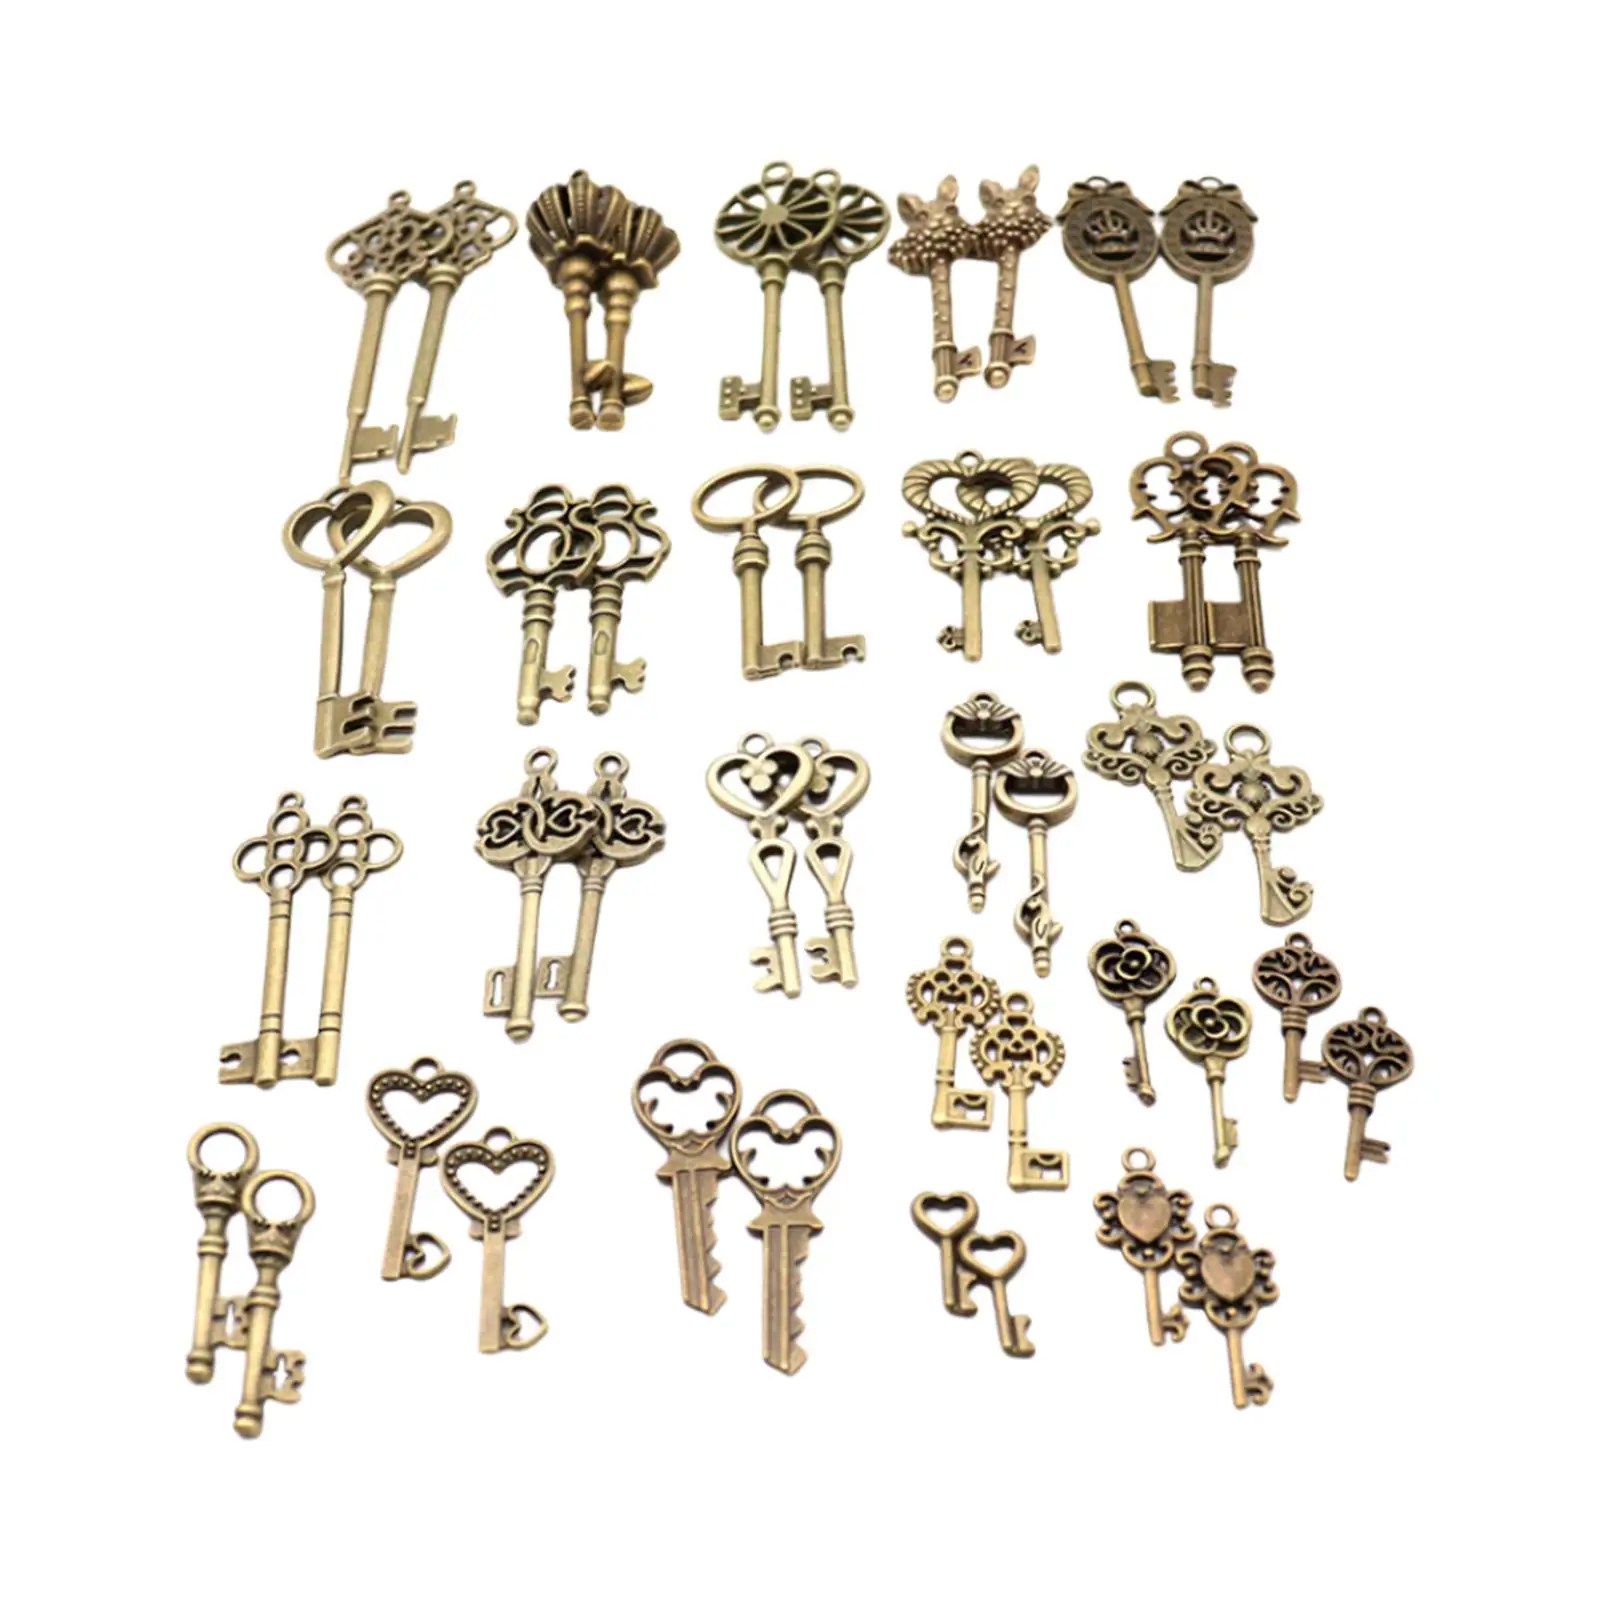 46x Skeleton Key Charms Antique Style Pendants for Jewelry Findings Making Accessory Key Chains Birthday Party Wedding Favors